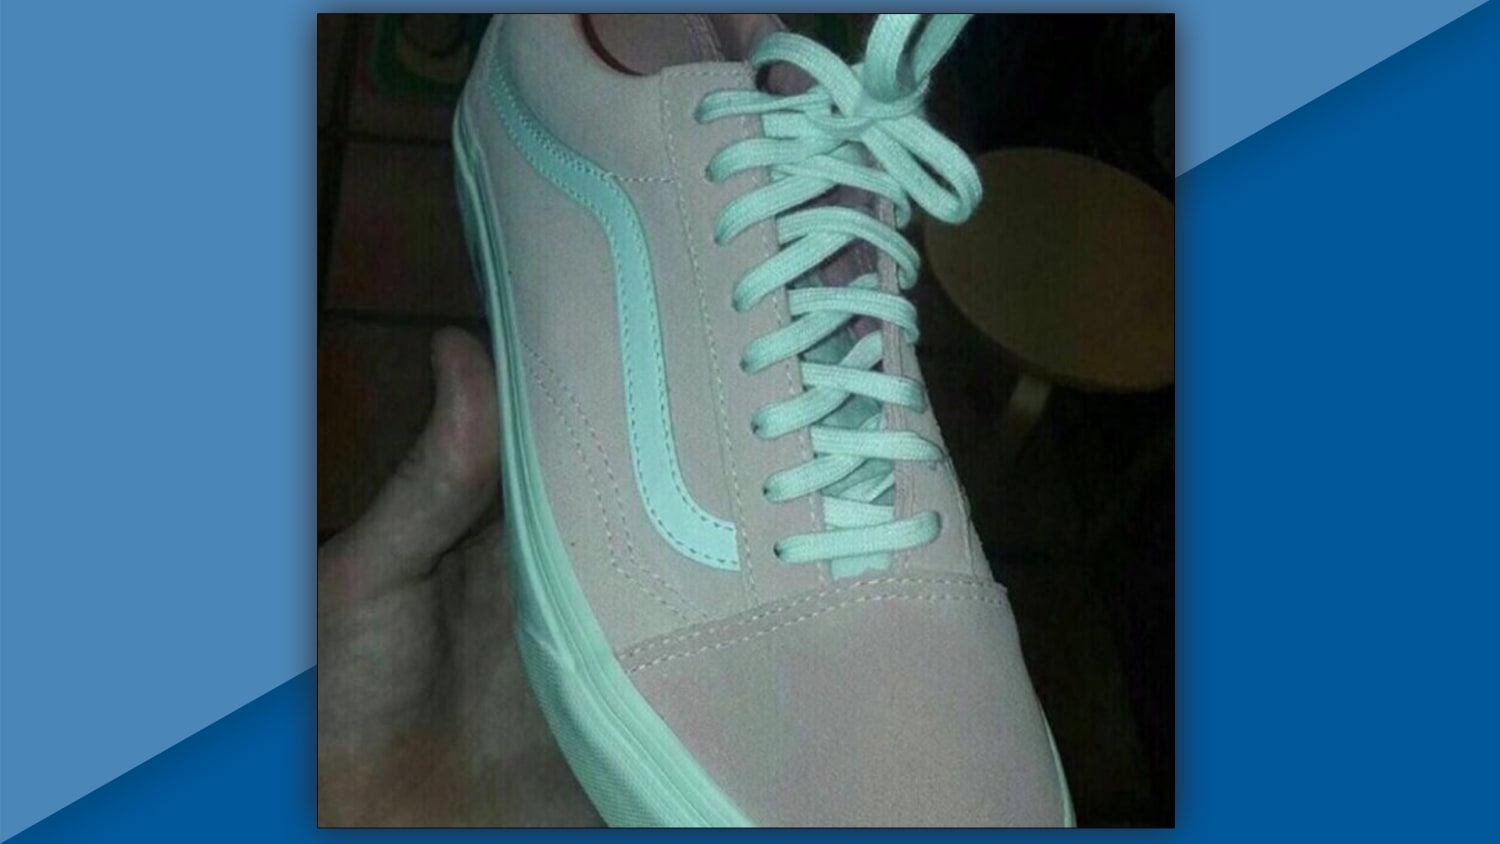 debate over the color of these sneakers